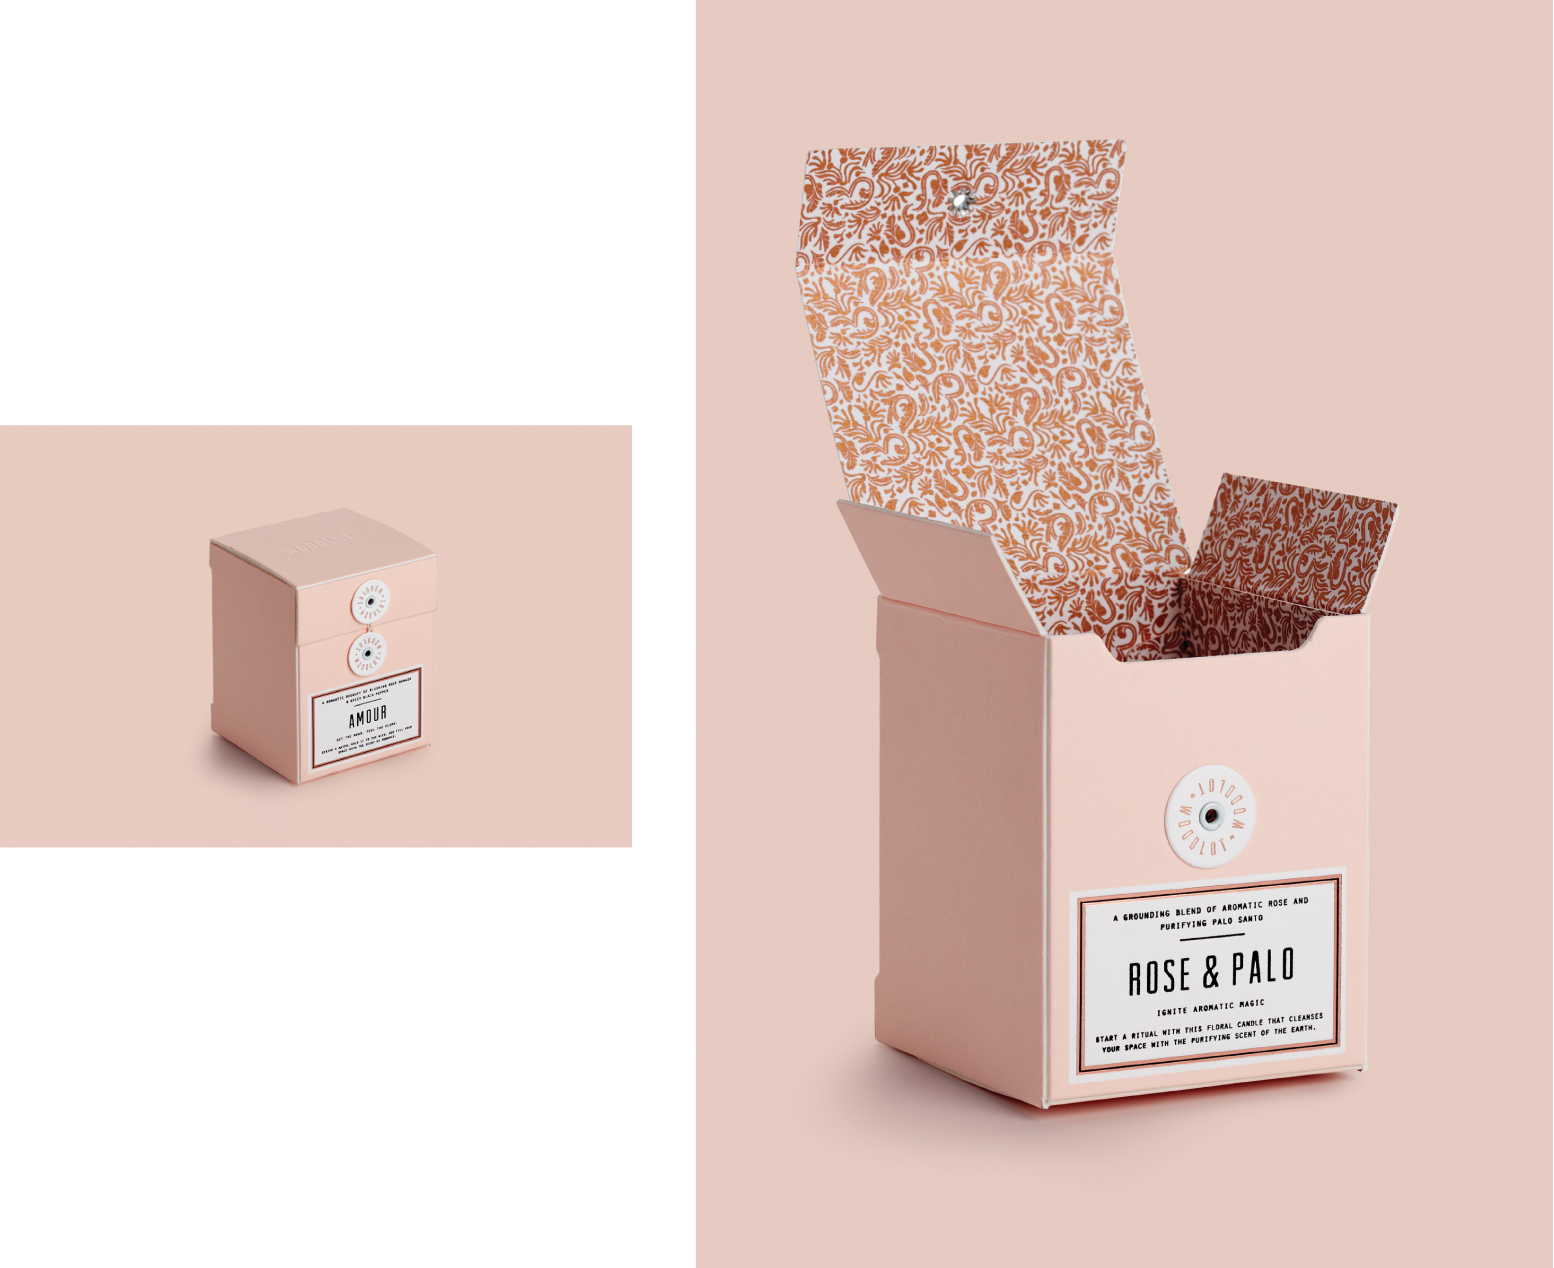 Candle vessel and packaging design, for sustainable natural body and home brand, Woodlot